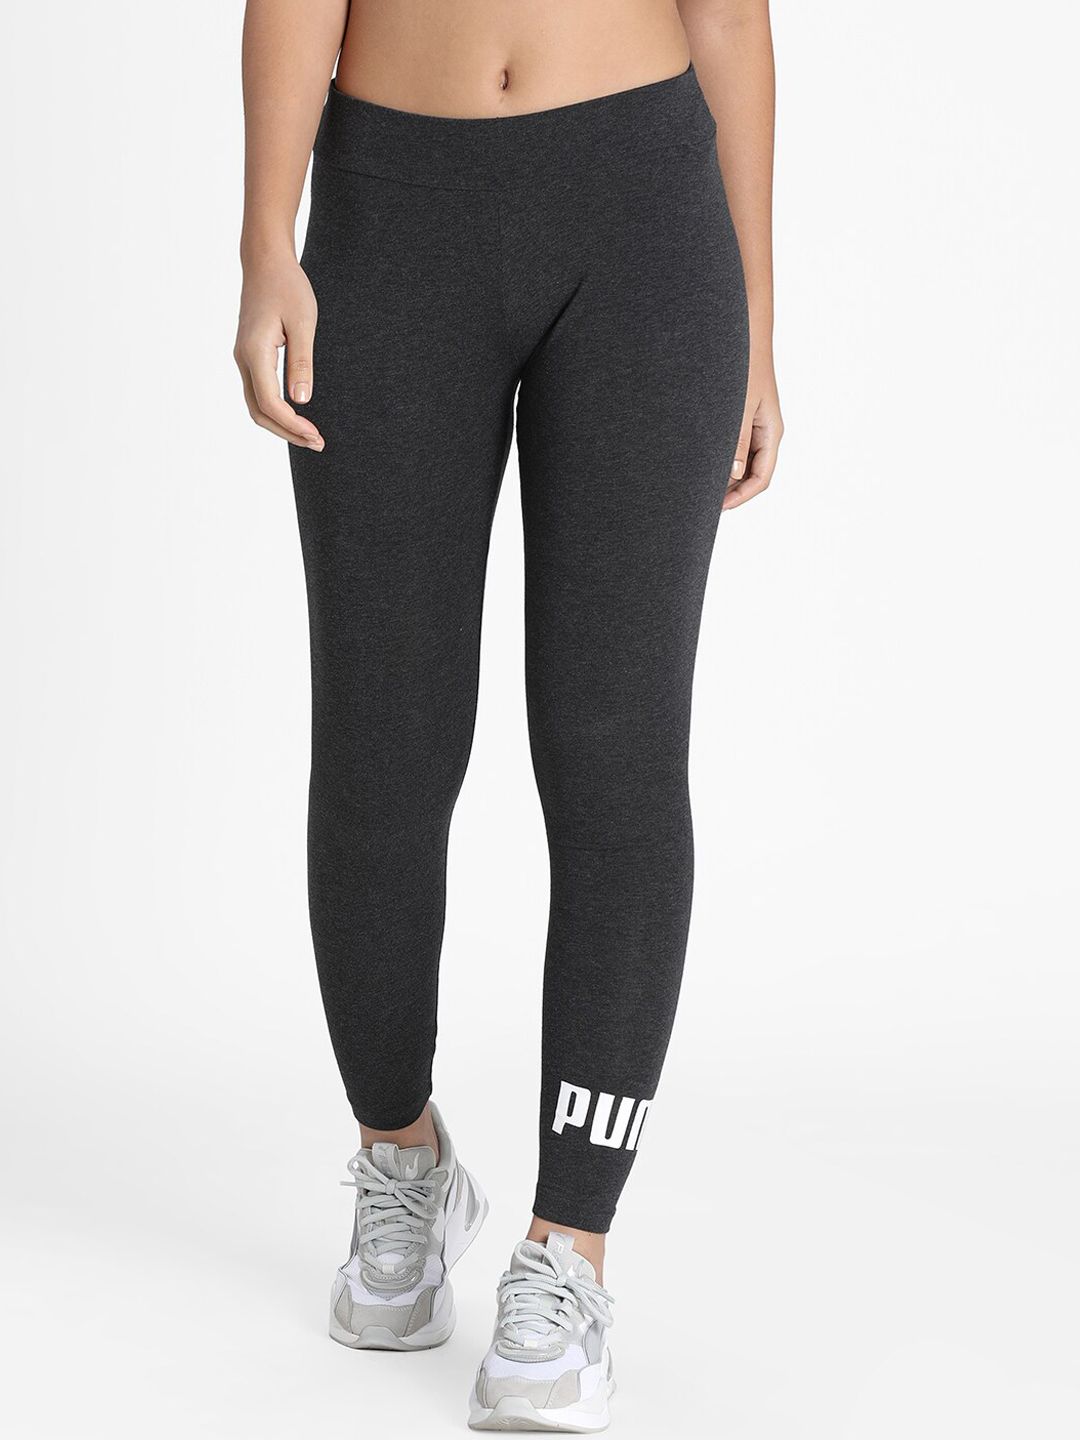 Puma Women Charcoal Grey Solid Tight Fit Essentials Logo Leggings Price in India